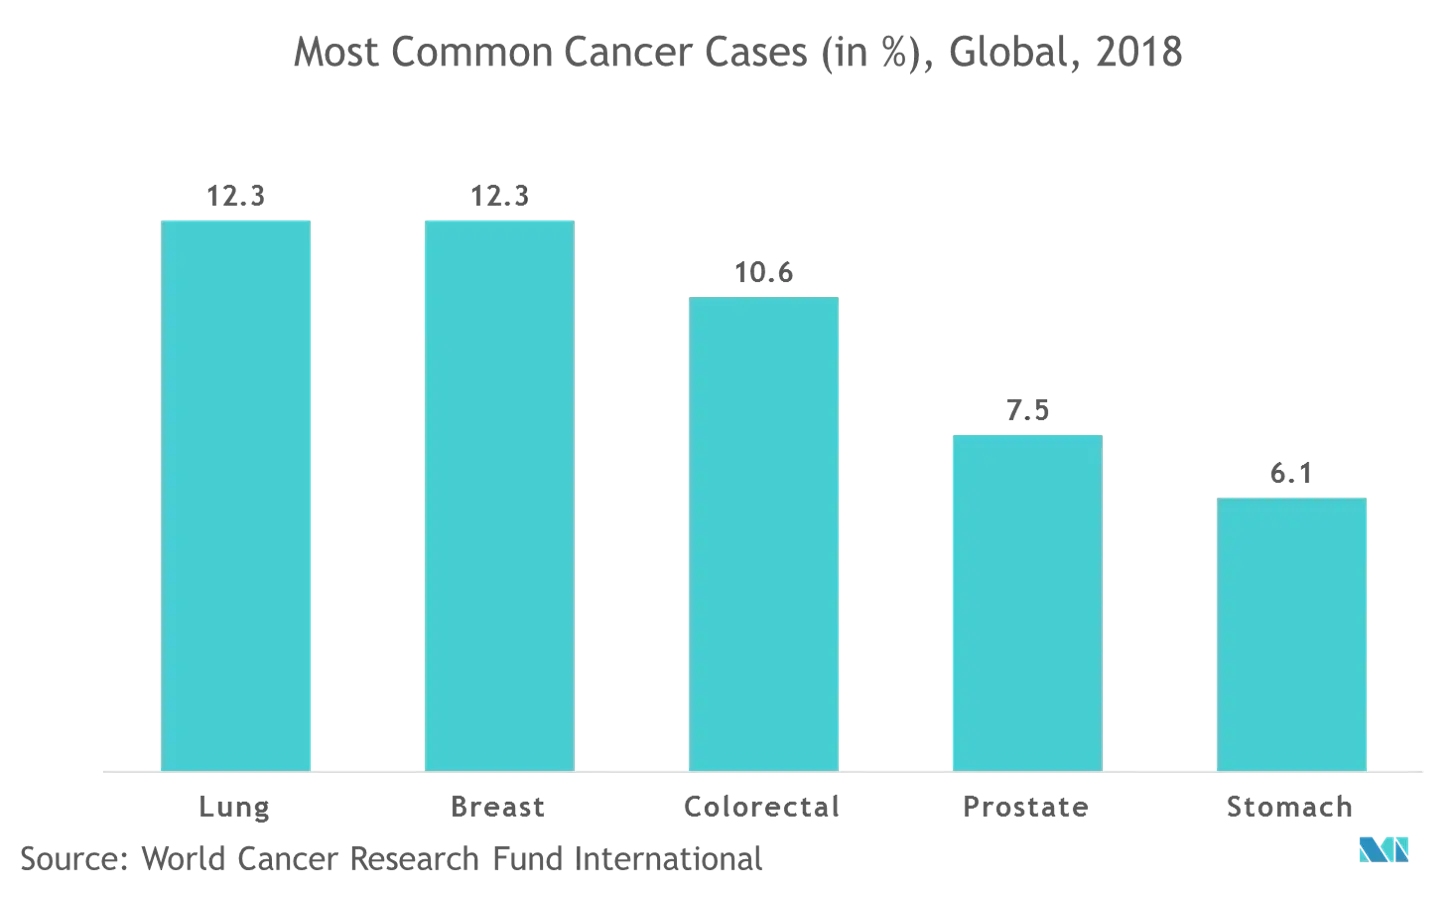 Radiation Dose Management Market : Most Common Cancer Case (in%), Global, 2018